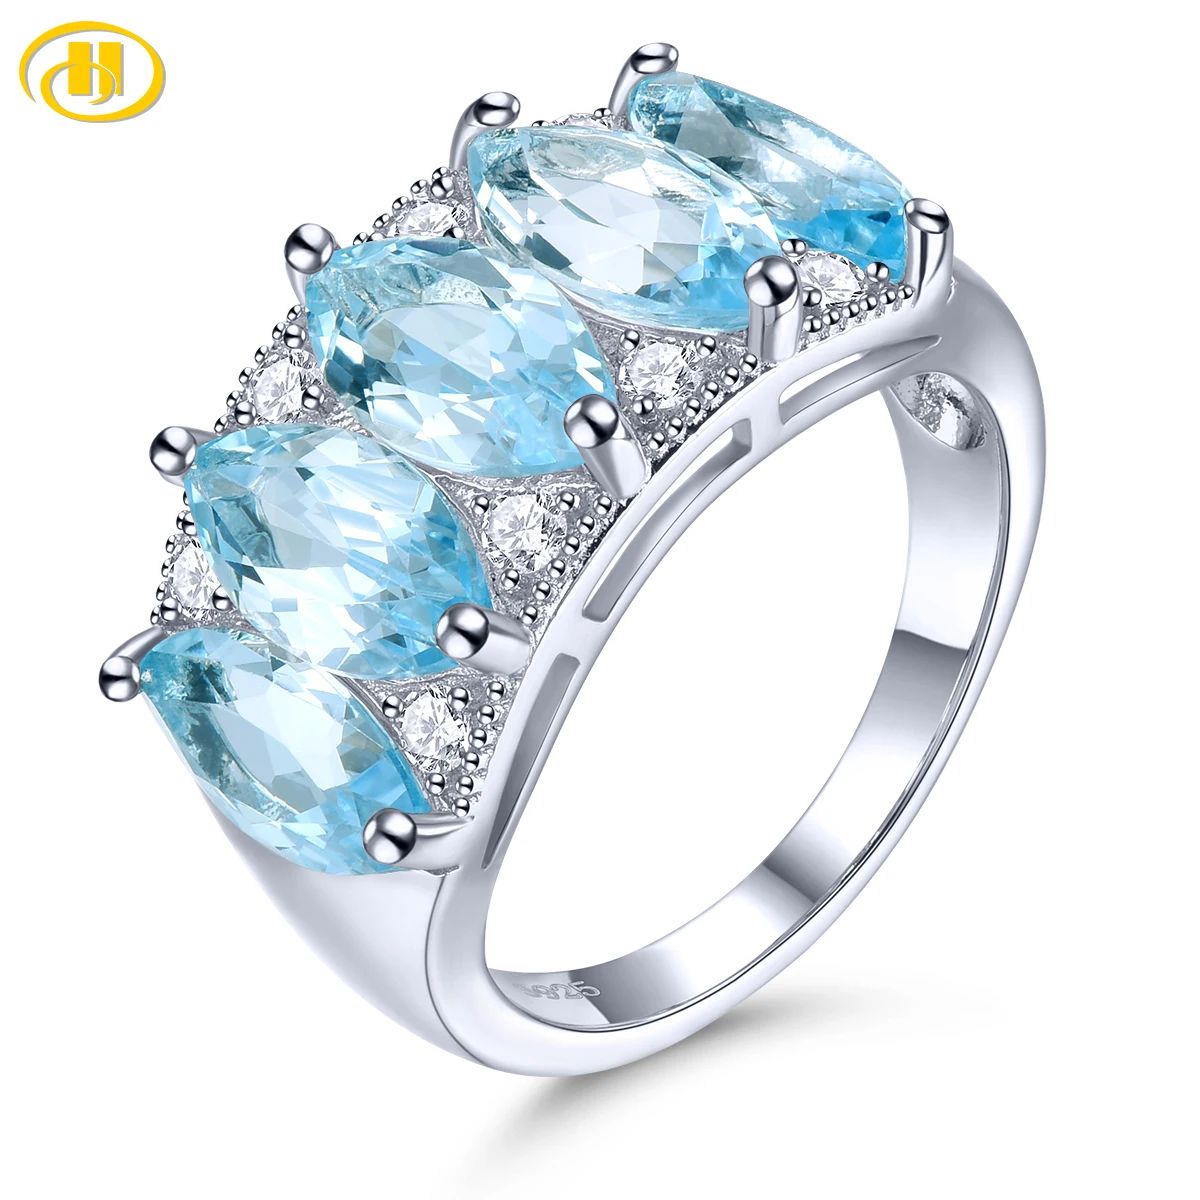 

Natural Sky Blue Topaz Sterling Silver Rings 6.5 Carats Genuine Light Blue Gemstone Classic Fine Jewelry Style Women Birthday